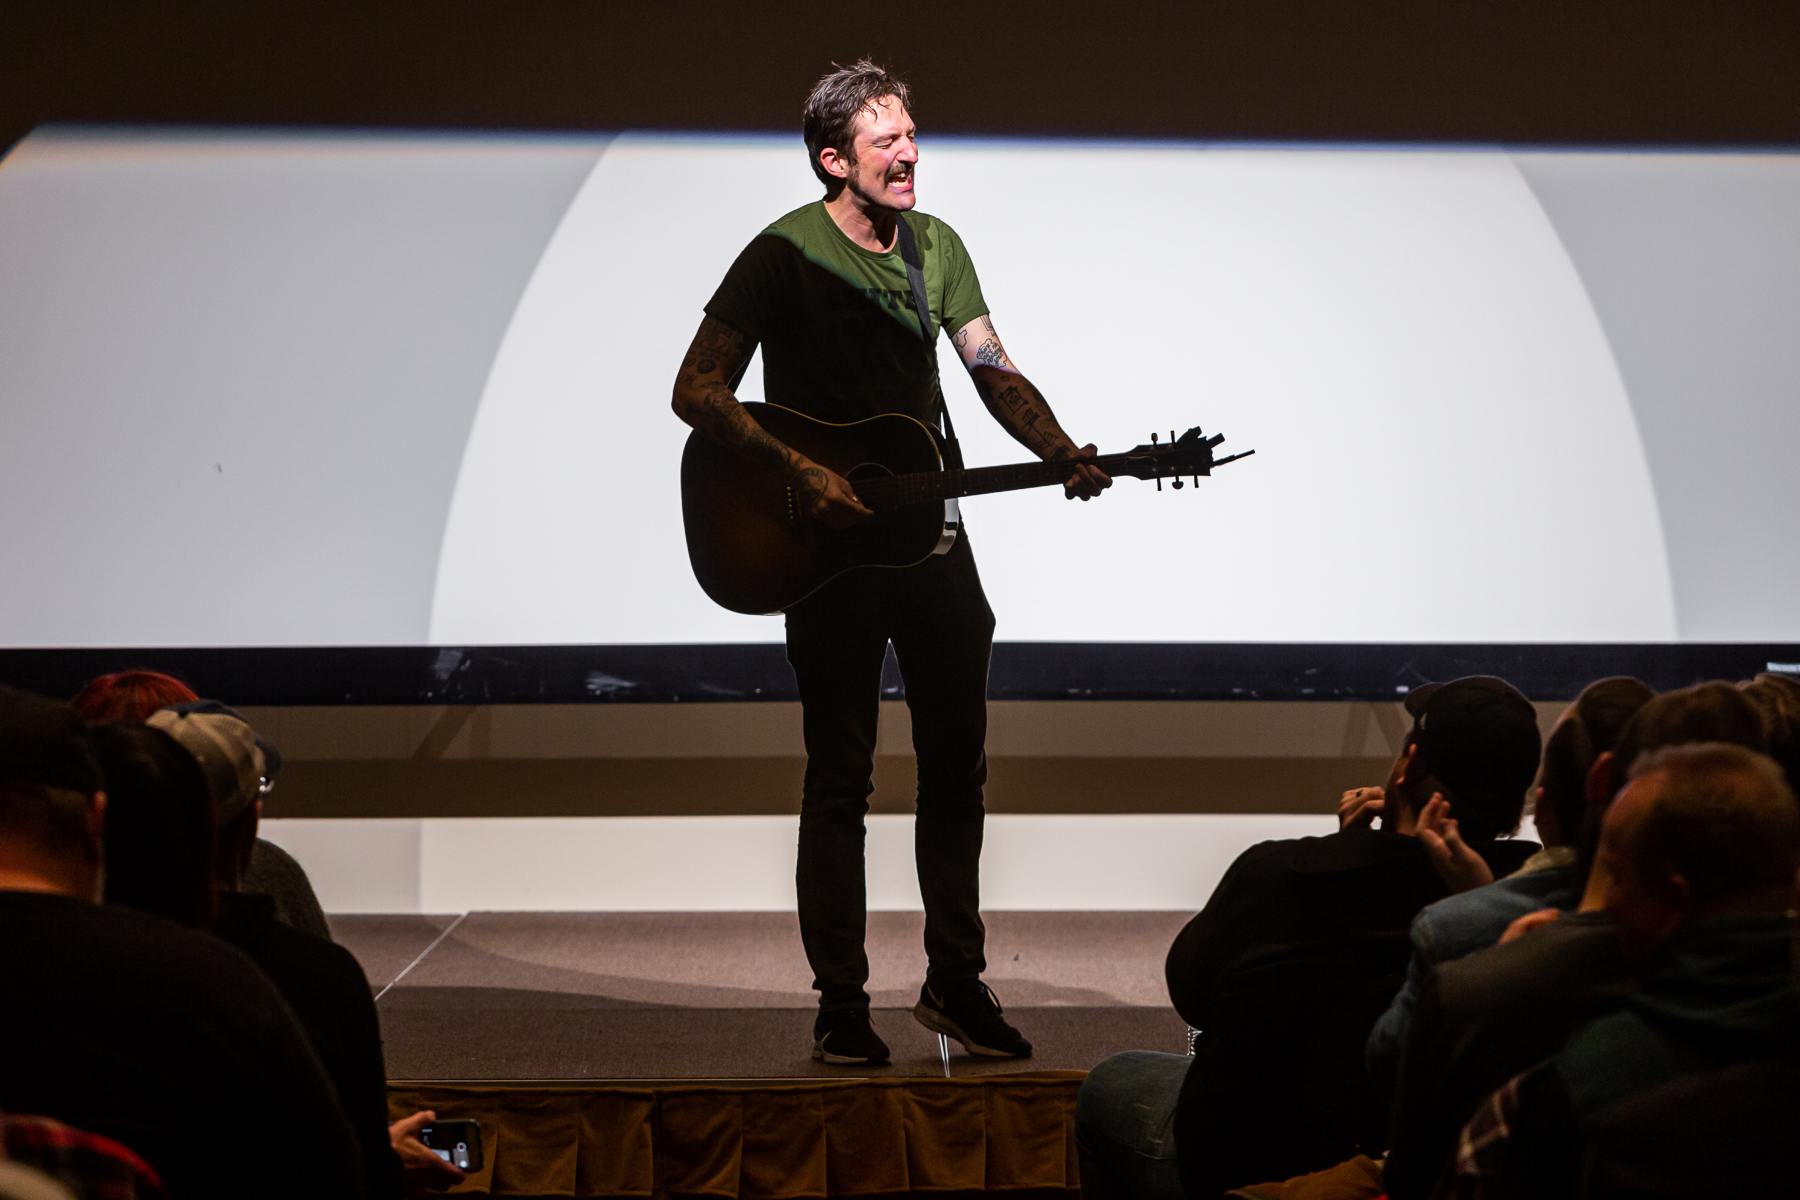 Frank Turner, musician, flew in from London to perform an acoustic set for the participants. (DePaul University/Randall Spriggs)